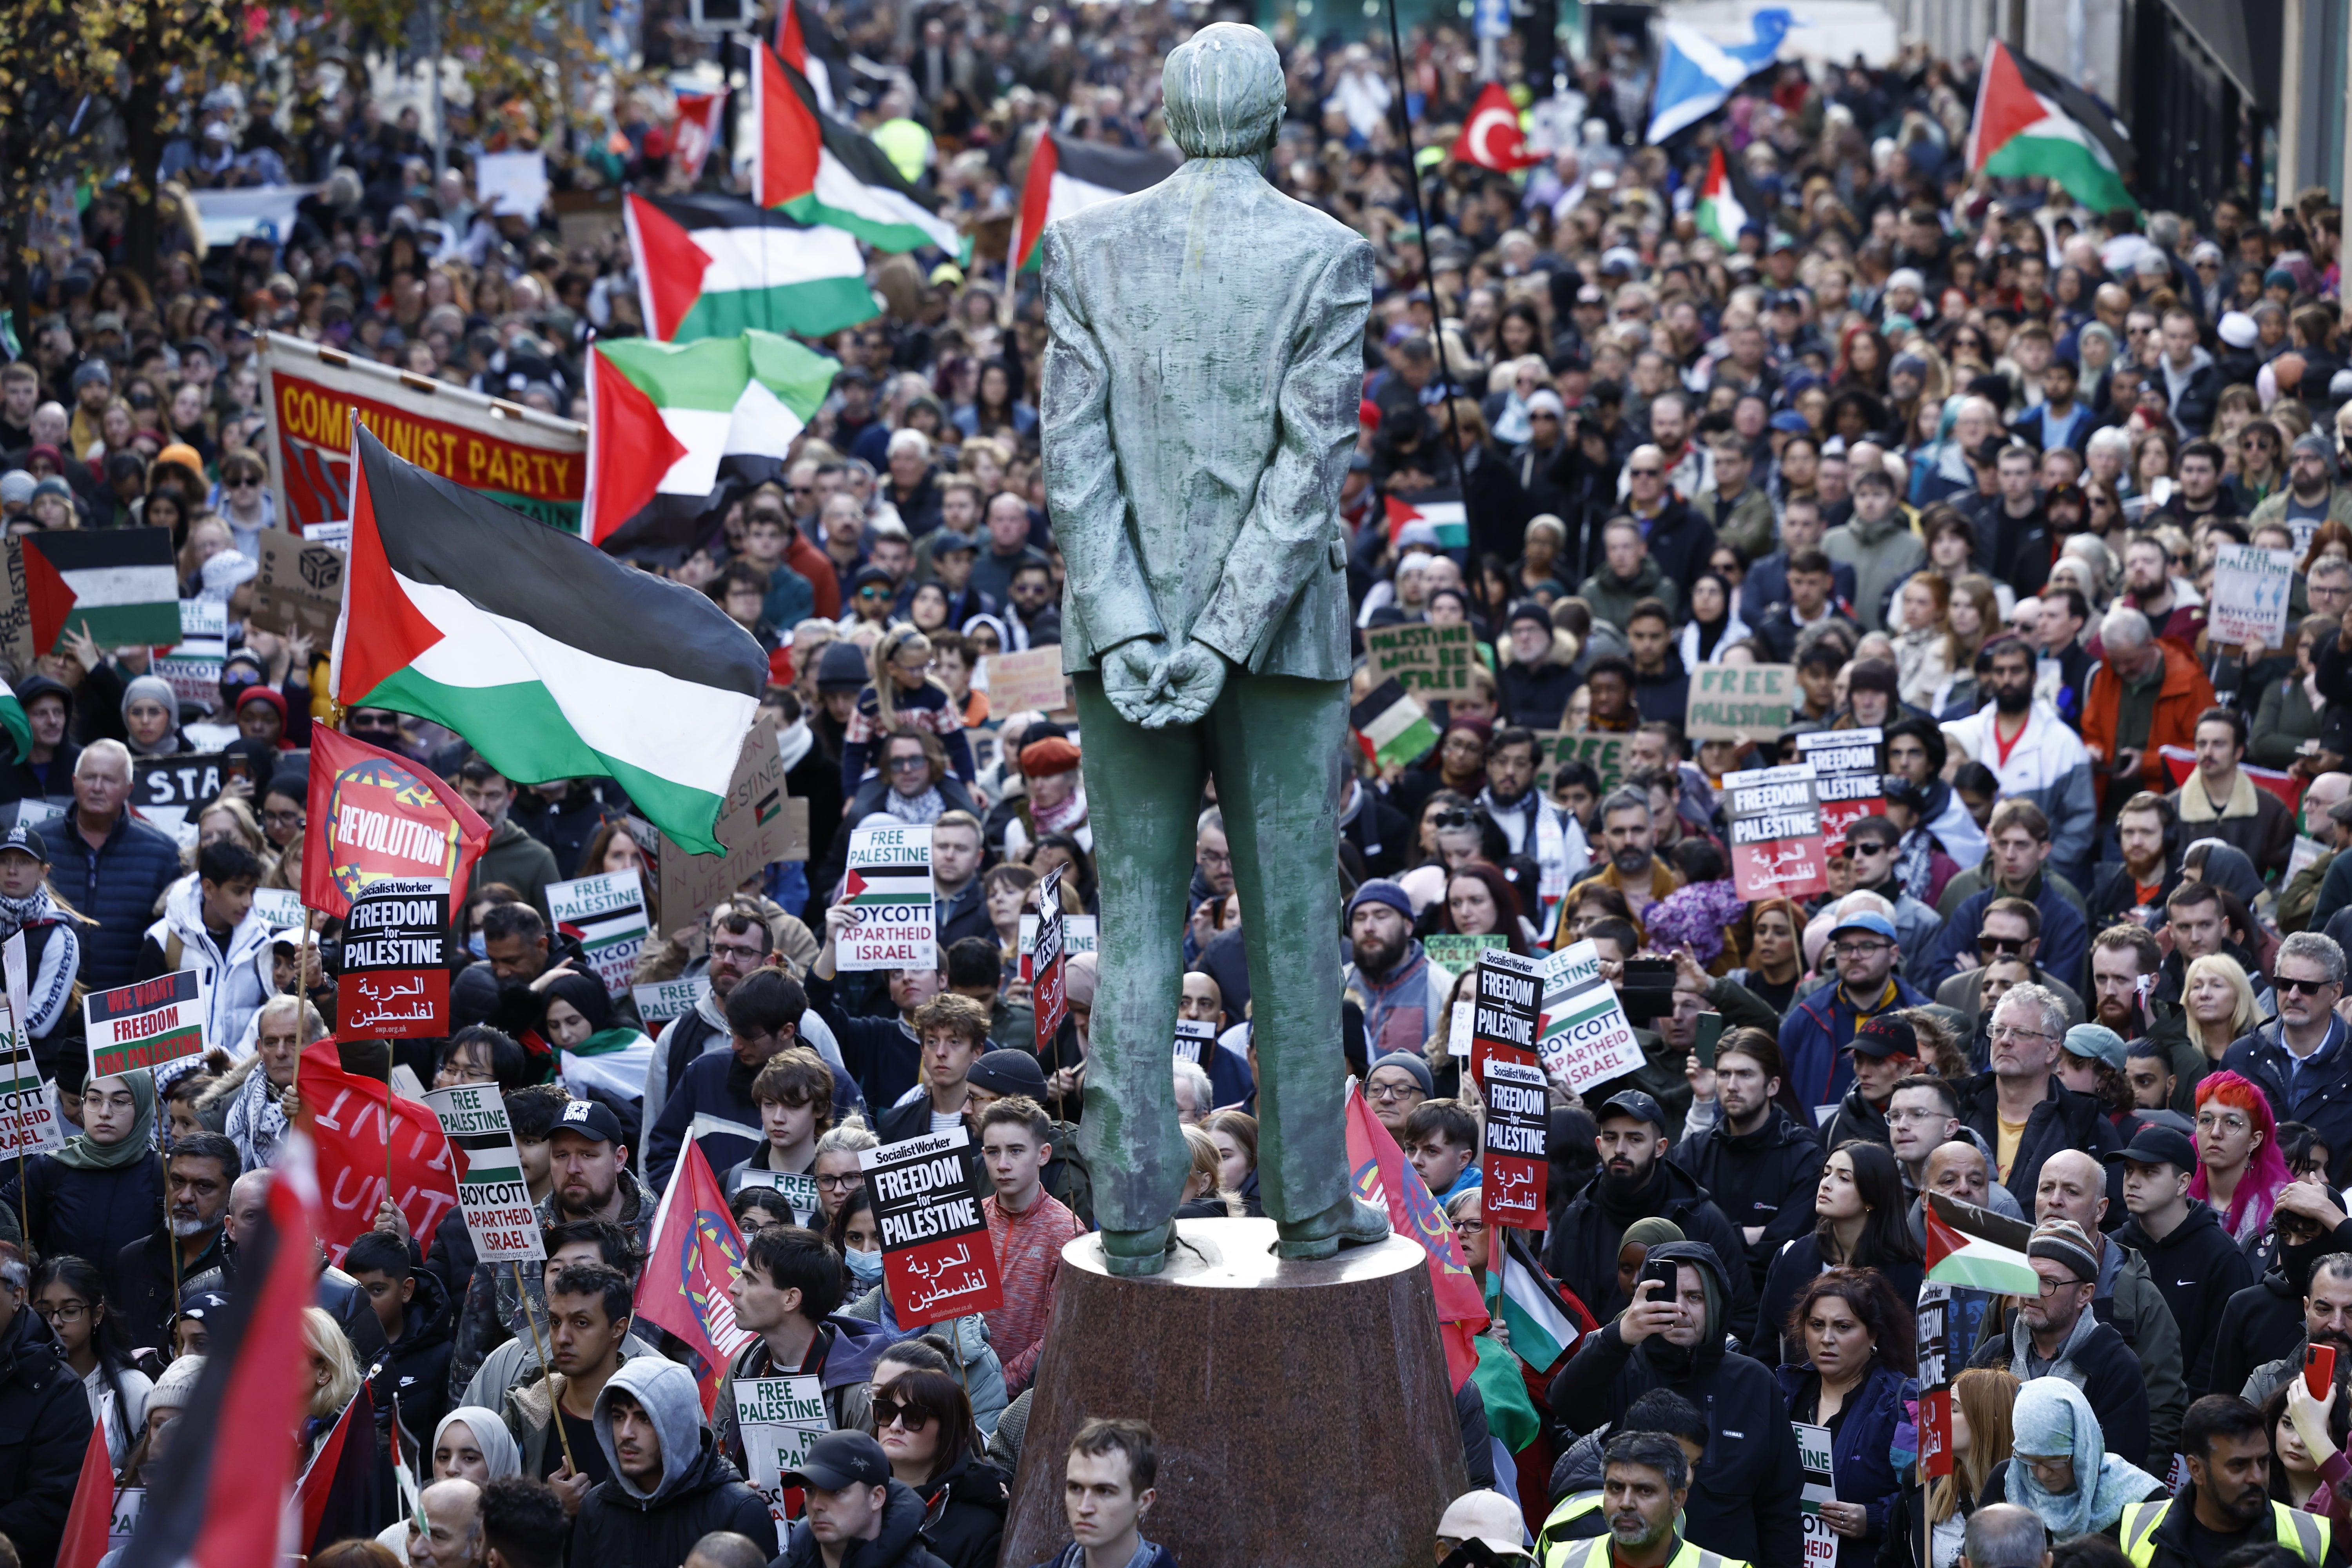 Protests took place across Glasgow, Dublin, Manchester and London in support of Palestine